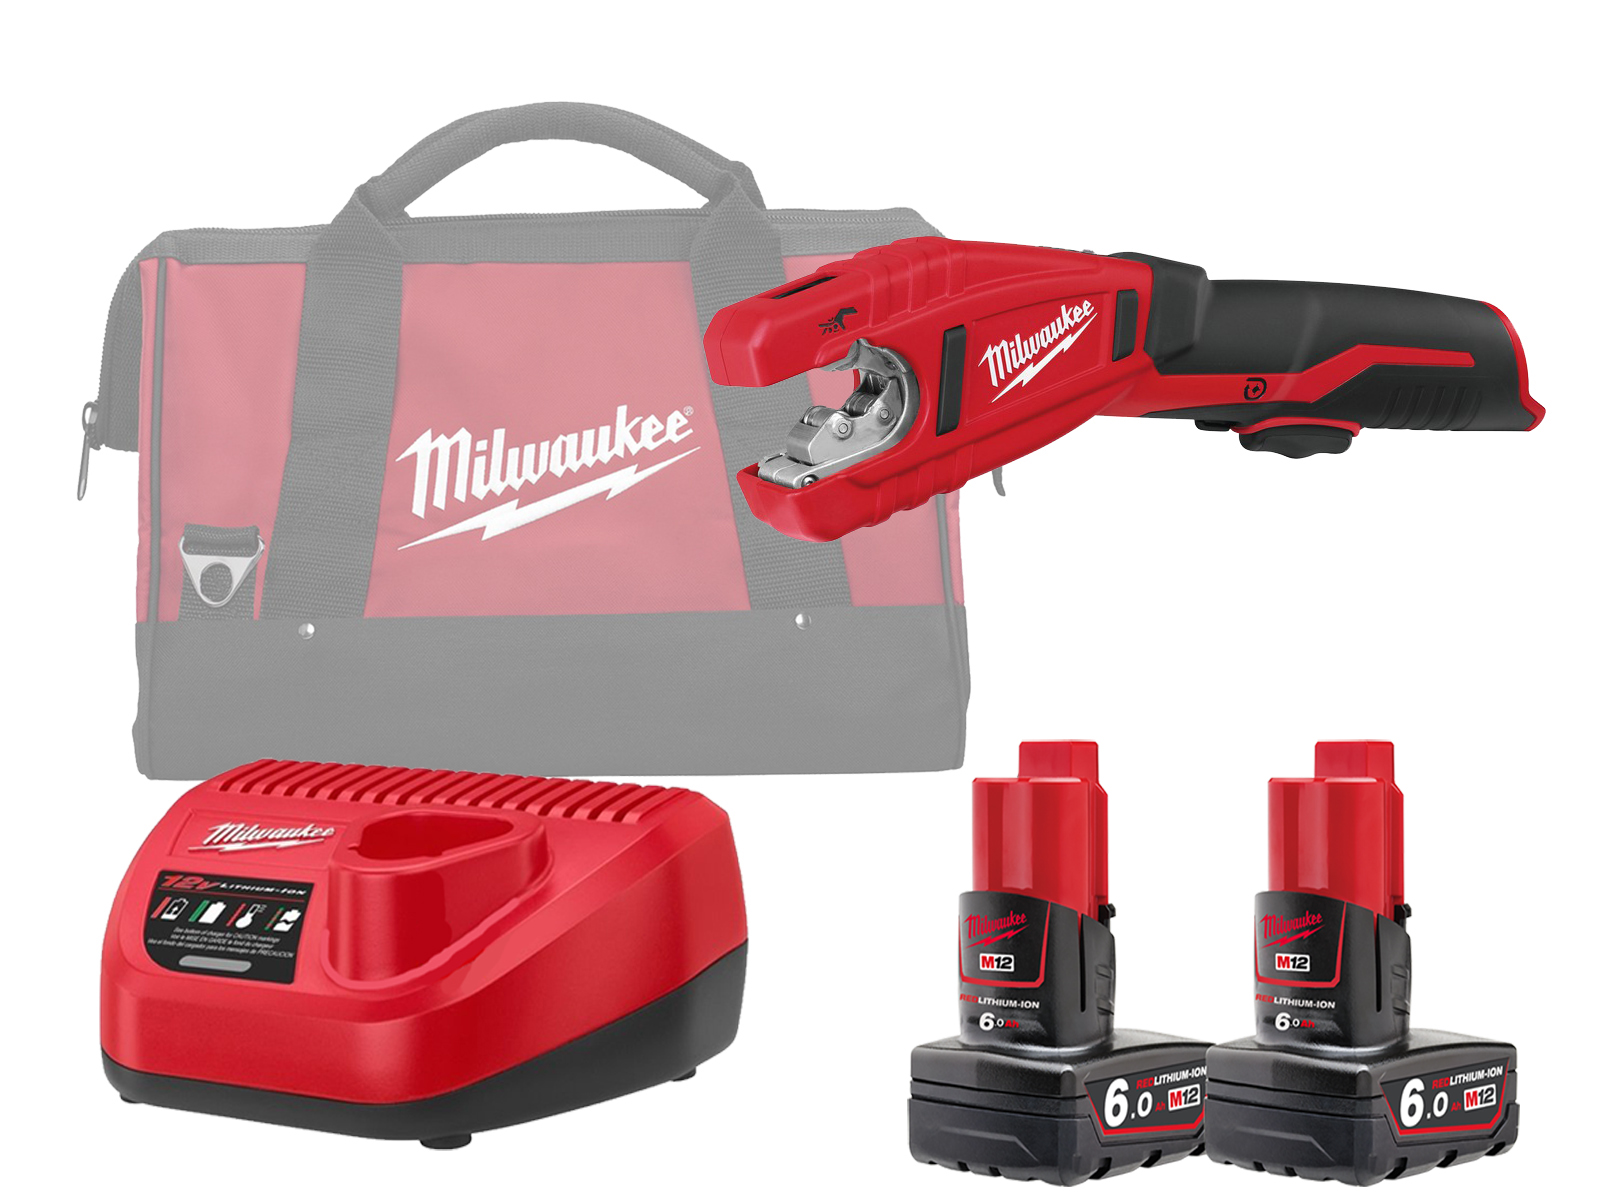 Milwaukee C12PC 12V Sub Compact Copper Pipe Cutter 12mm to 28mm - 6.0Ah Pack